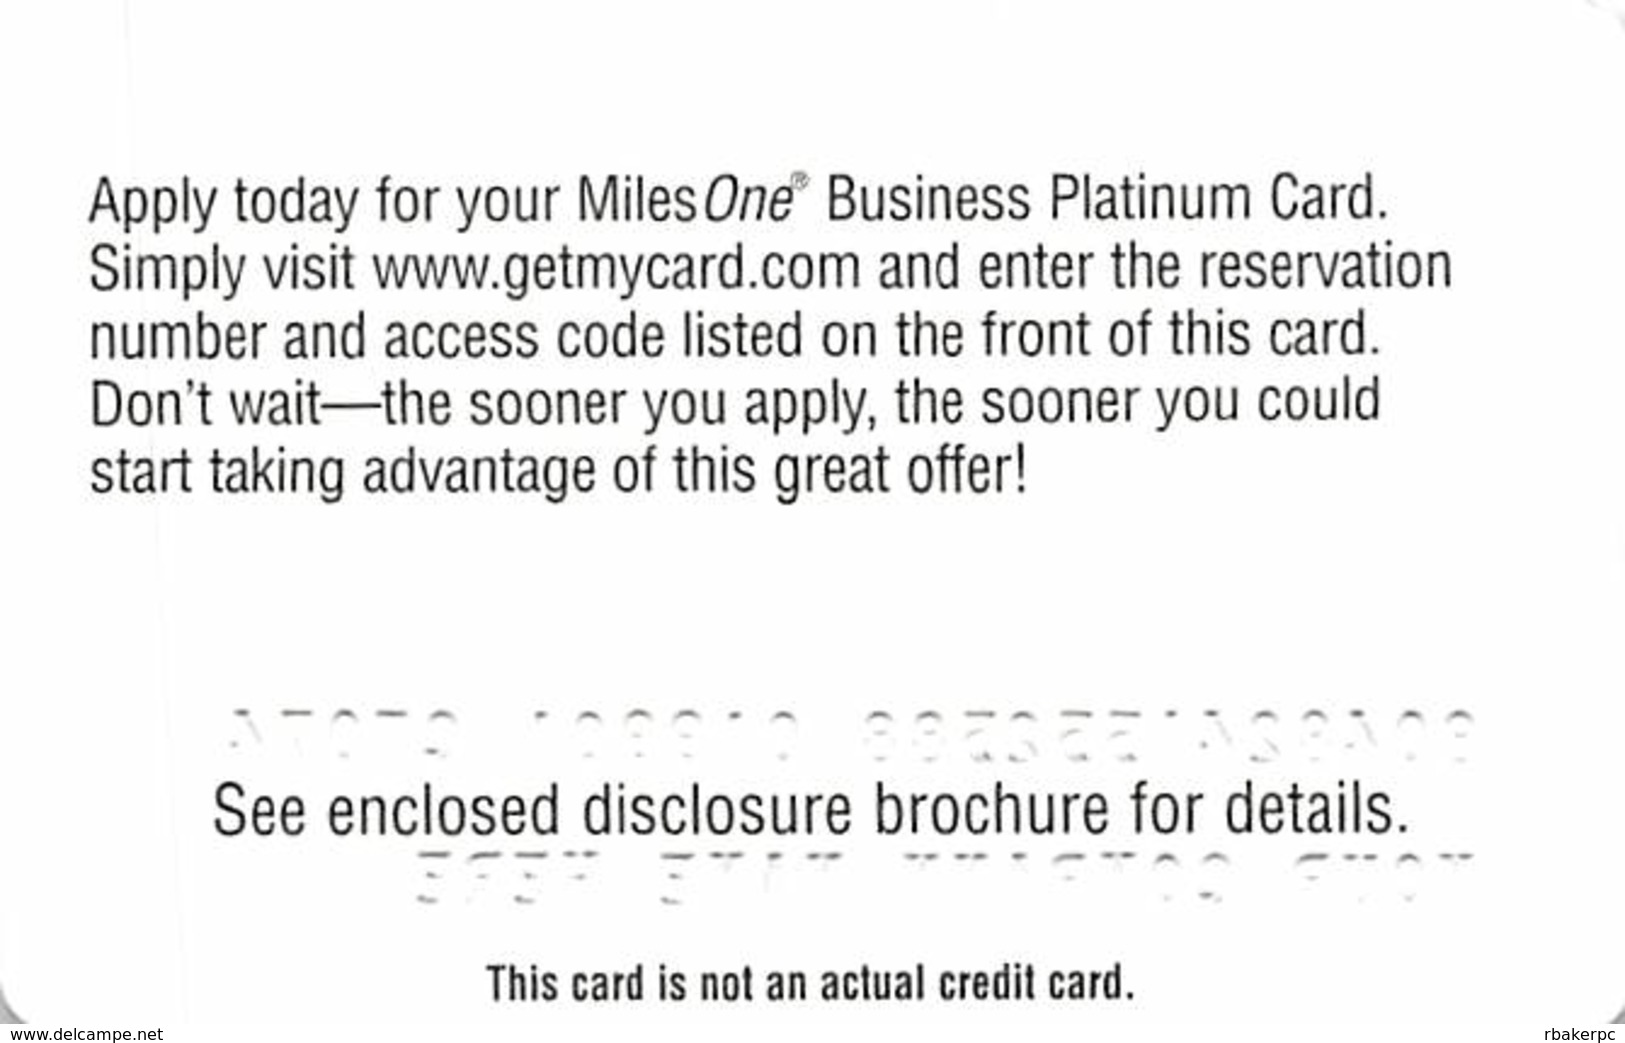 CapitalOne MilesOne Business Platinum Sample Card (blank Reverse) With SBP39 - Credit Cards (Exp. Date Min. 10 Years)